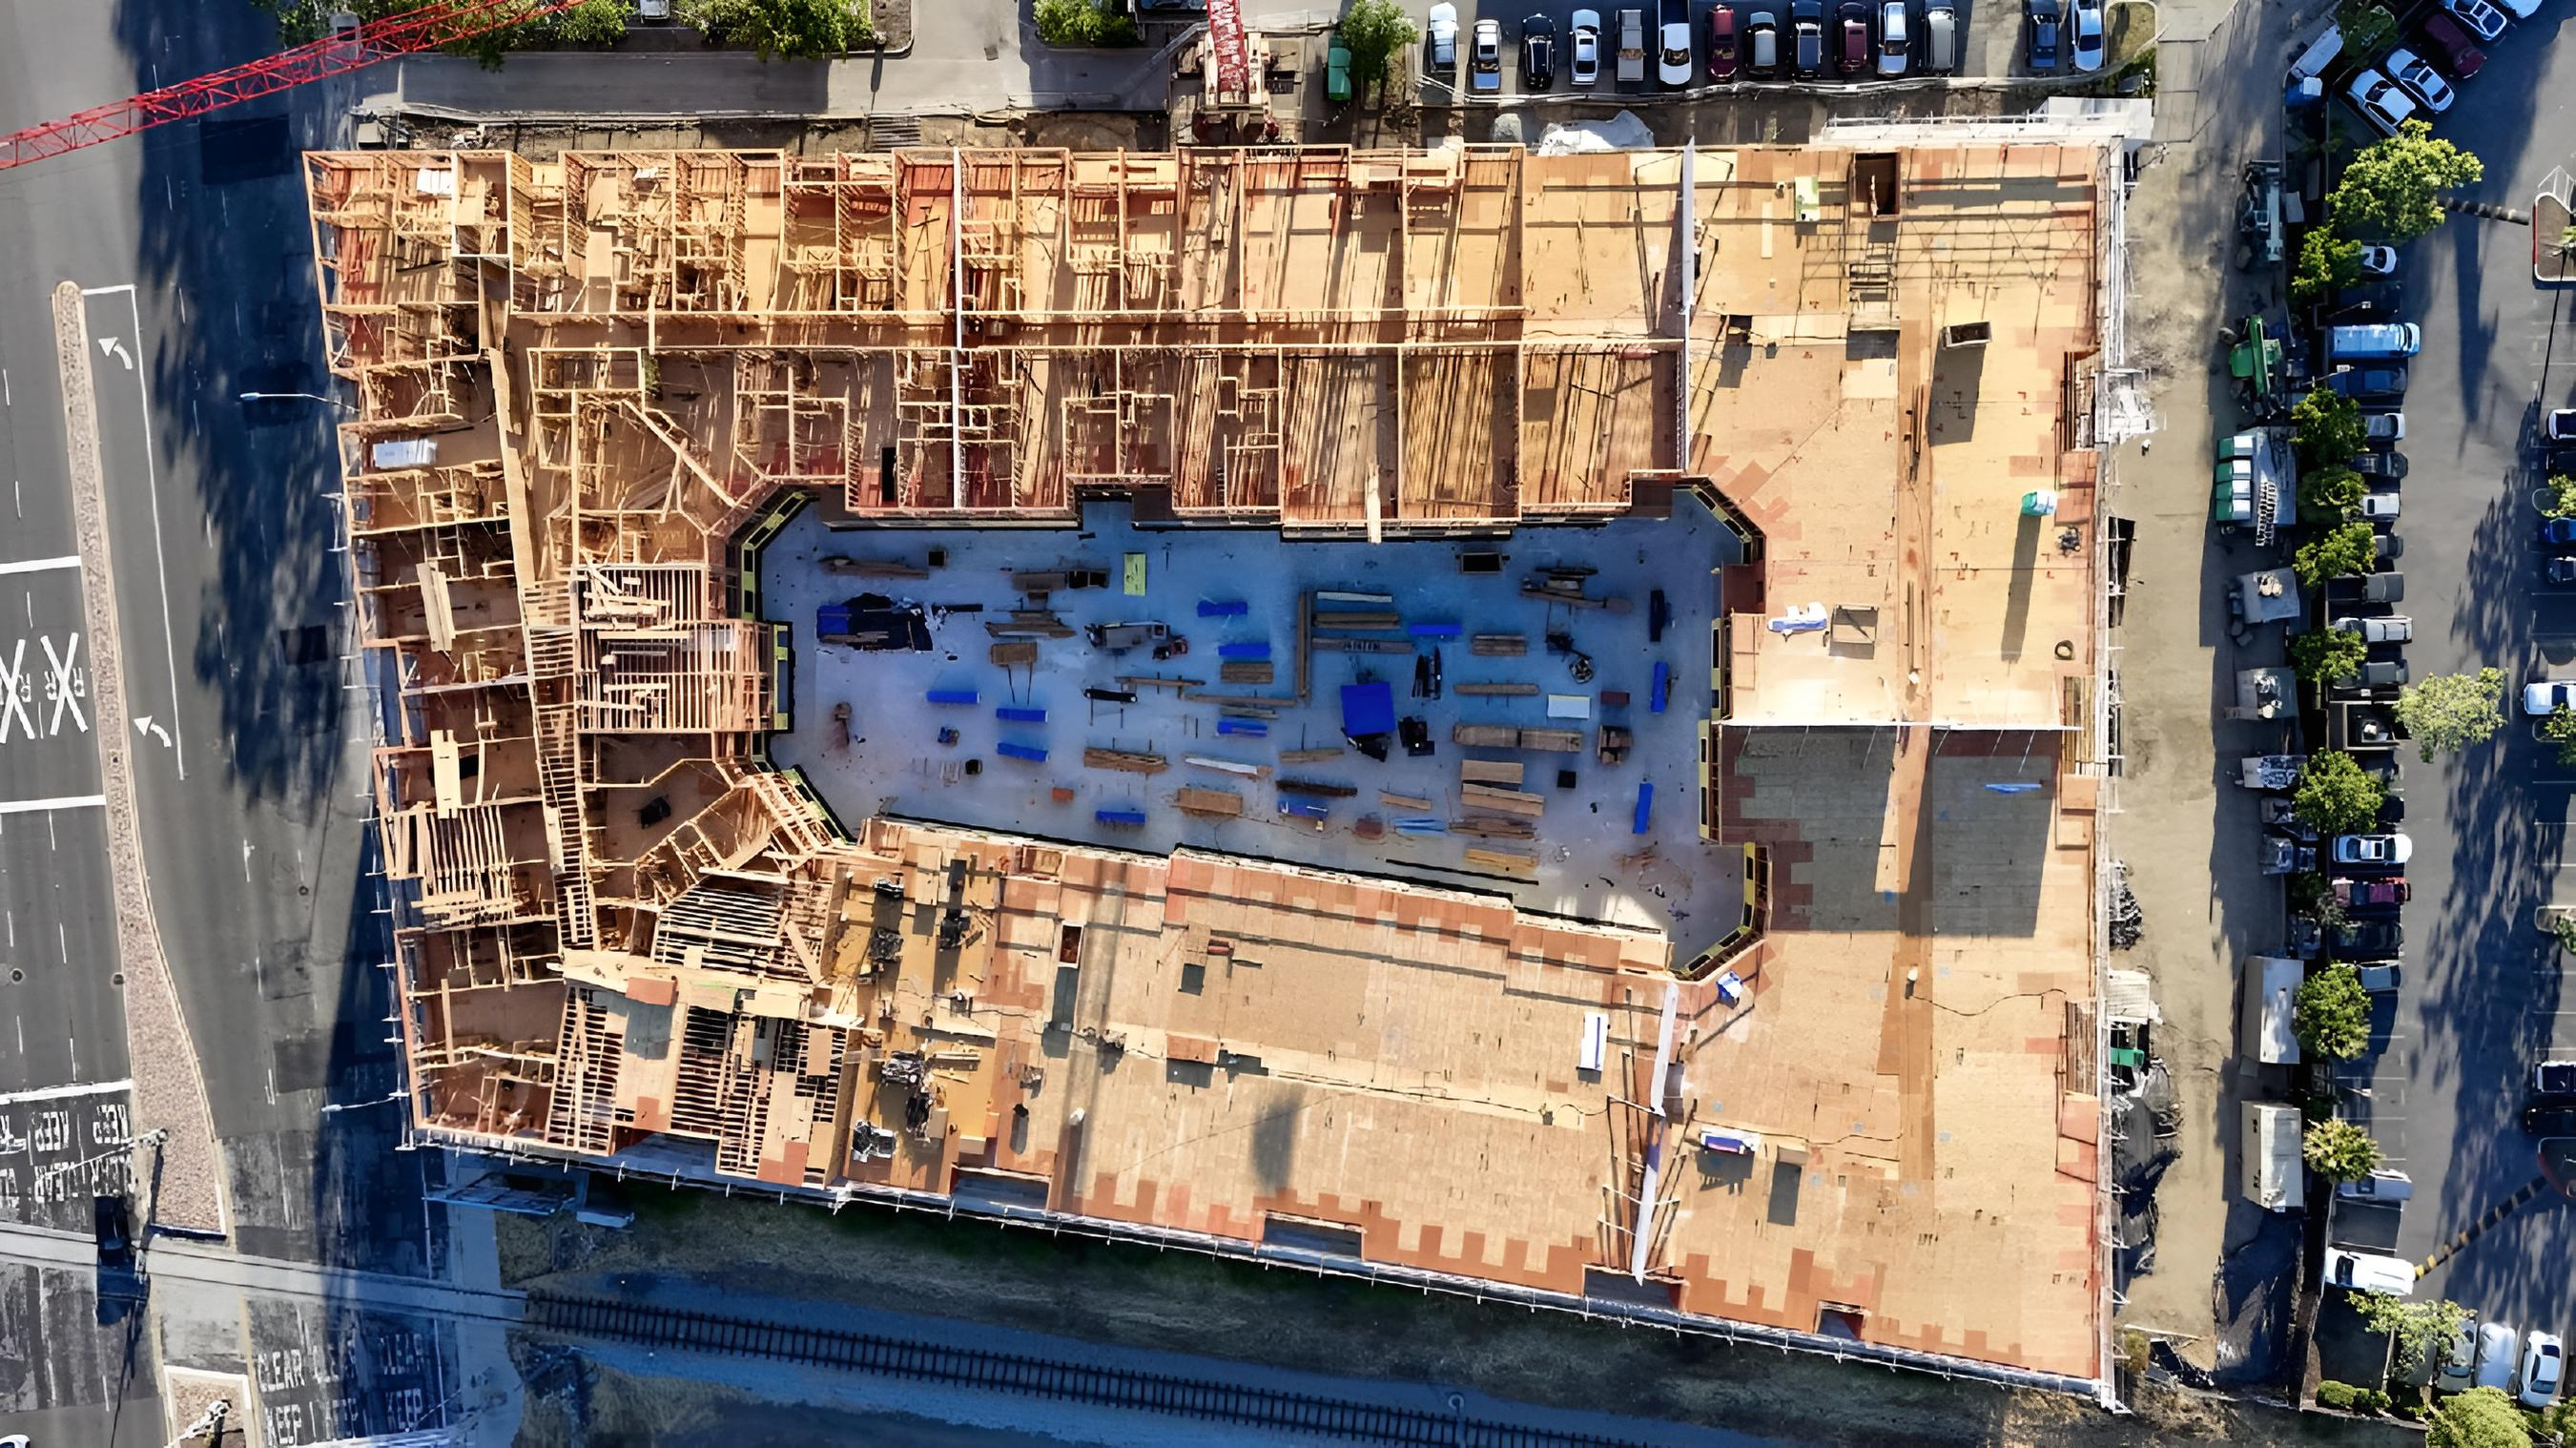 This image shows an aerial view of a large construction site, with the wooden framework of a rectangular building taking shape, surrounded by roads and parking areas.